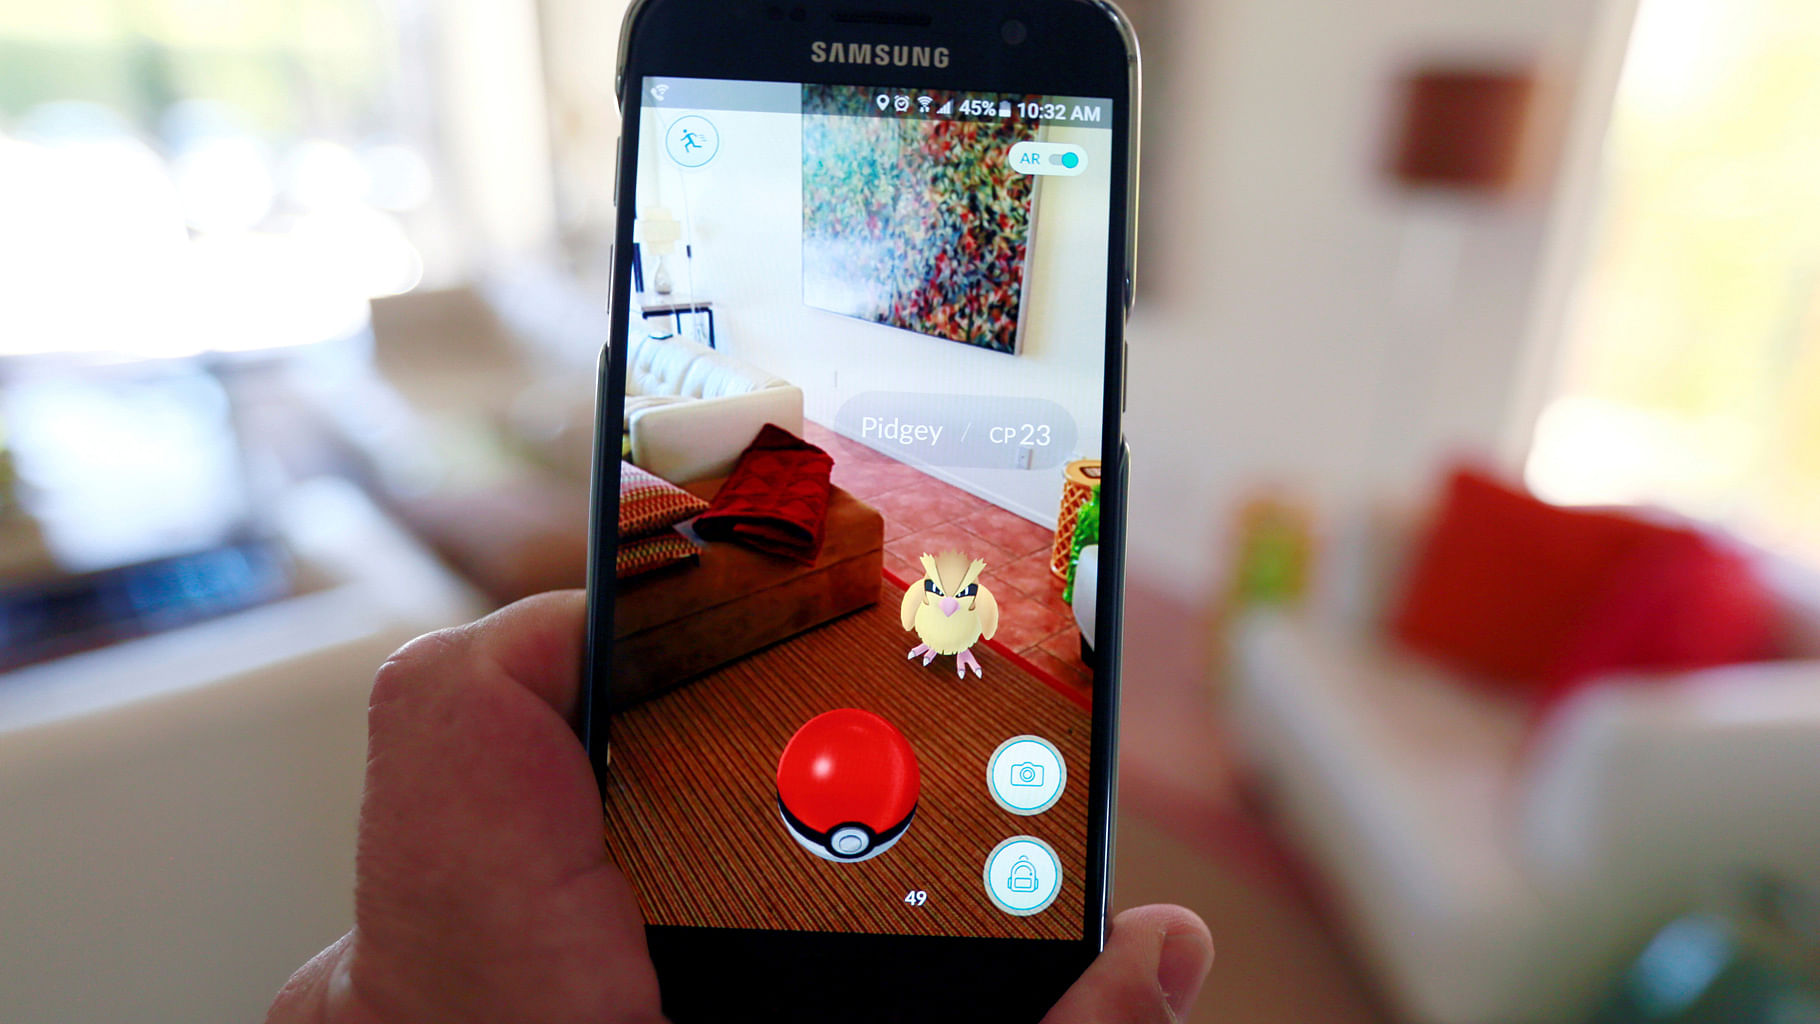 Now everyone can become a Pokémon master by playing this game. (Photo: Reuters)